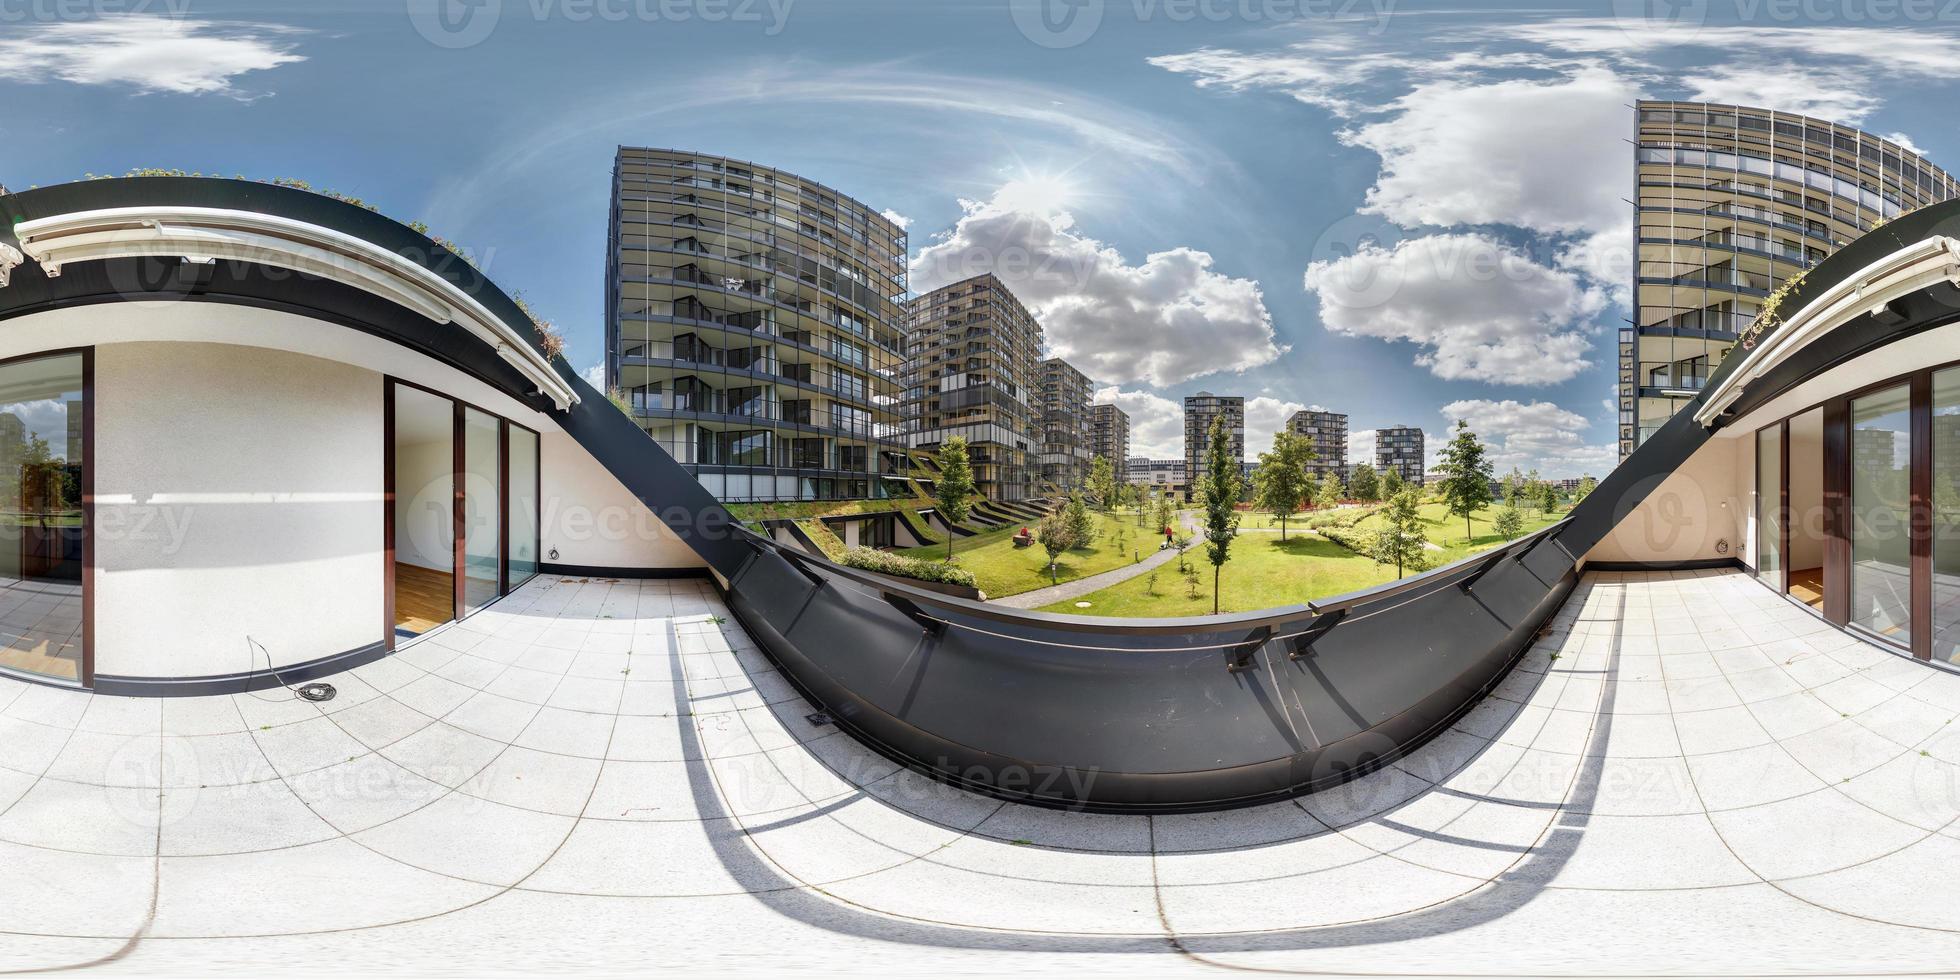 Full 360 panorama in equirectangular spherical projection, Skybox for VR  3d content. View from the balcony on the elite residential complex in sunny day photo